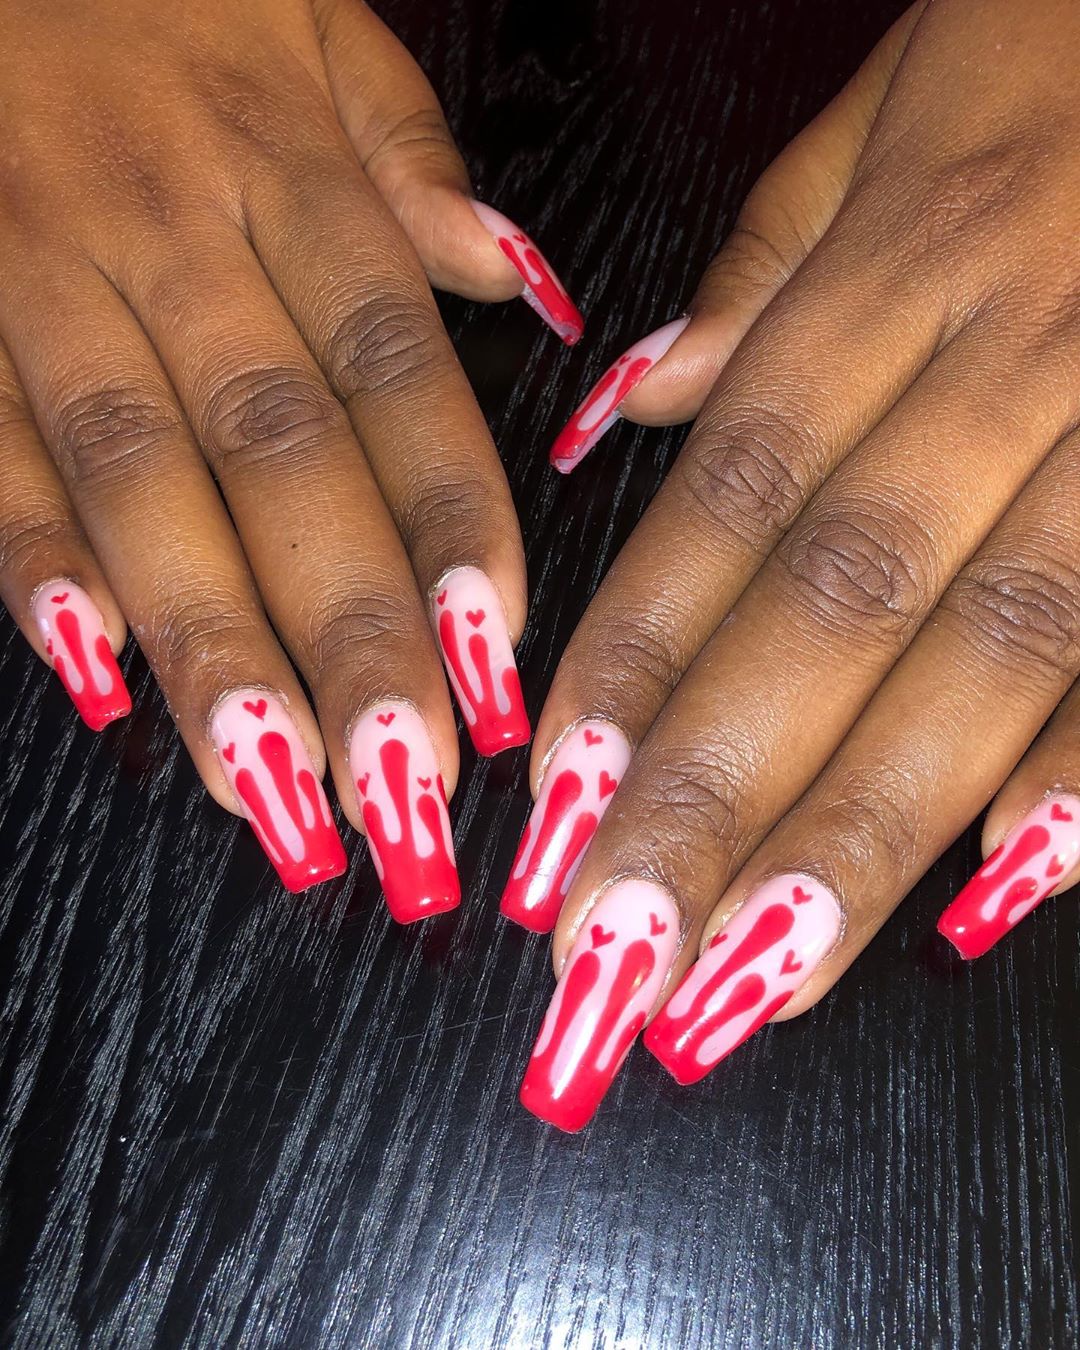 Lizzo’s Halloween Manicure Is Gross and Cute at the Same Time